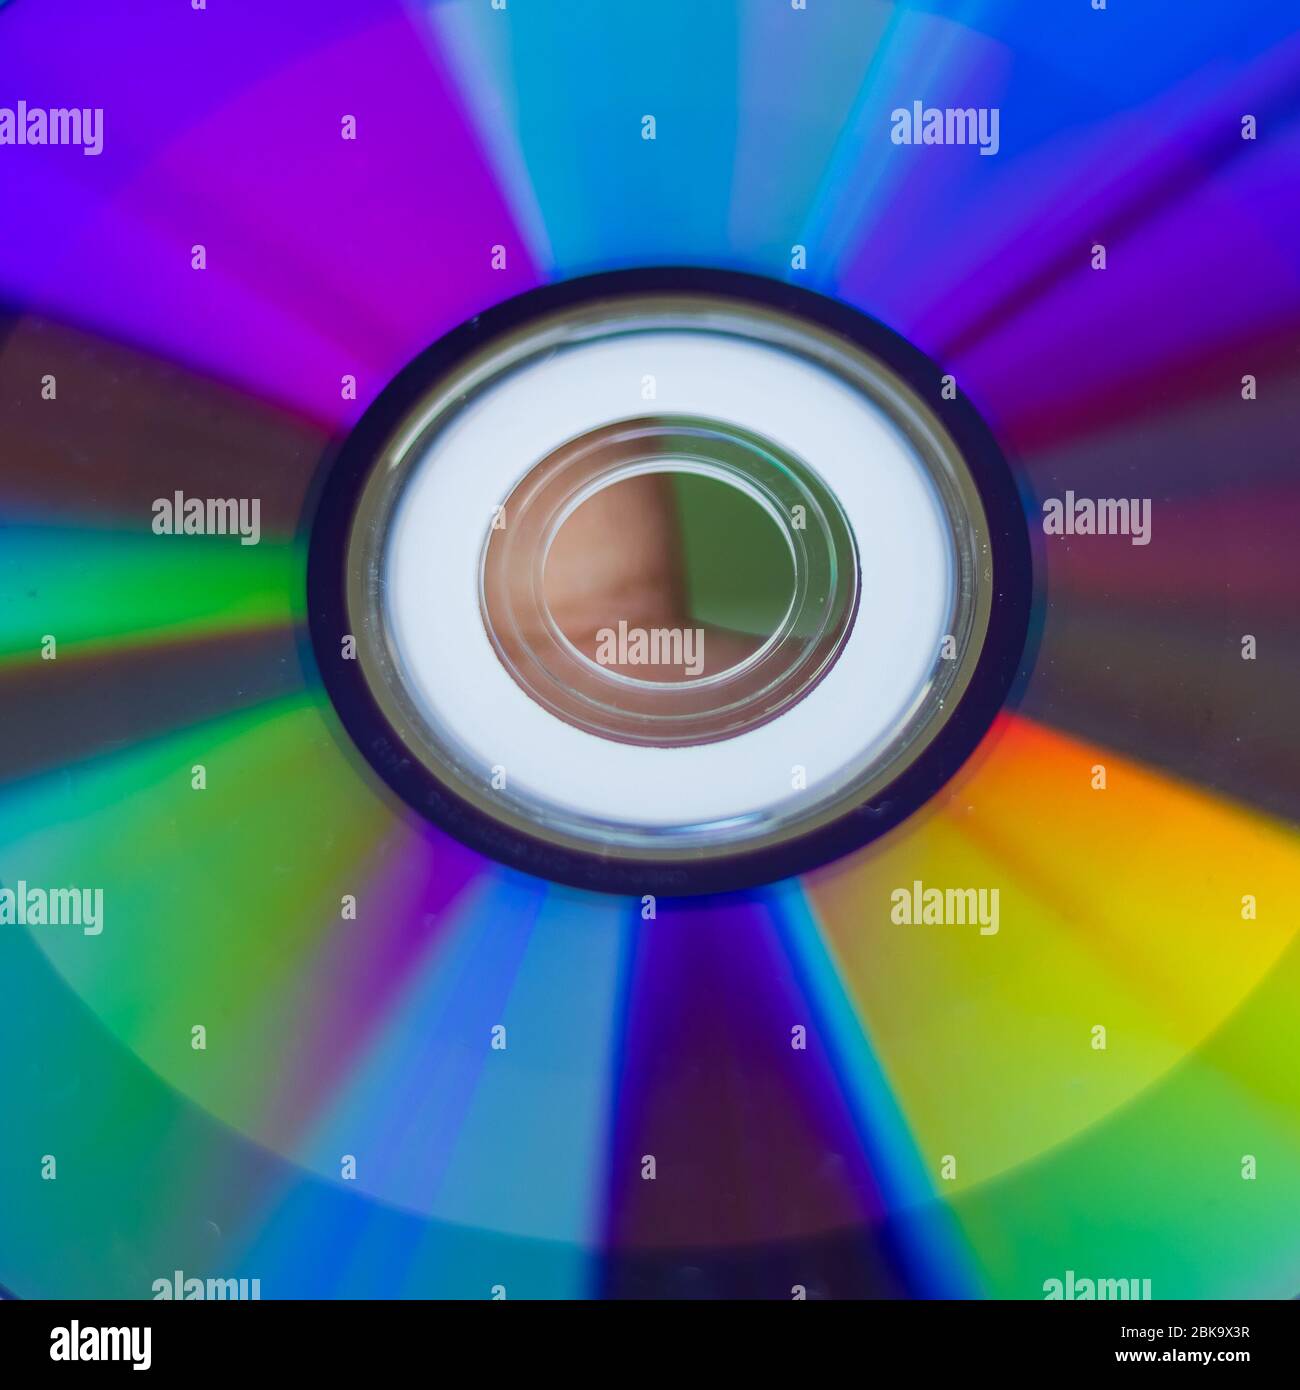 Compact Disc. Holding a CD in hands. The back side of the CD reflects colorful lights. Rainbow colors. Stock Photo